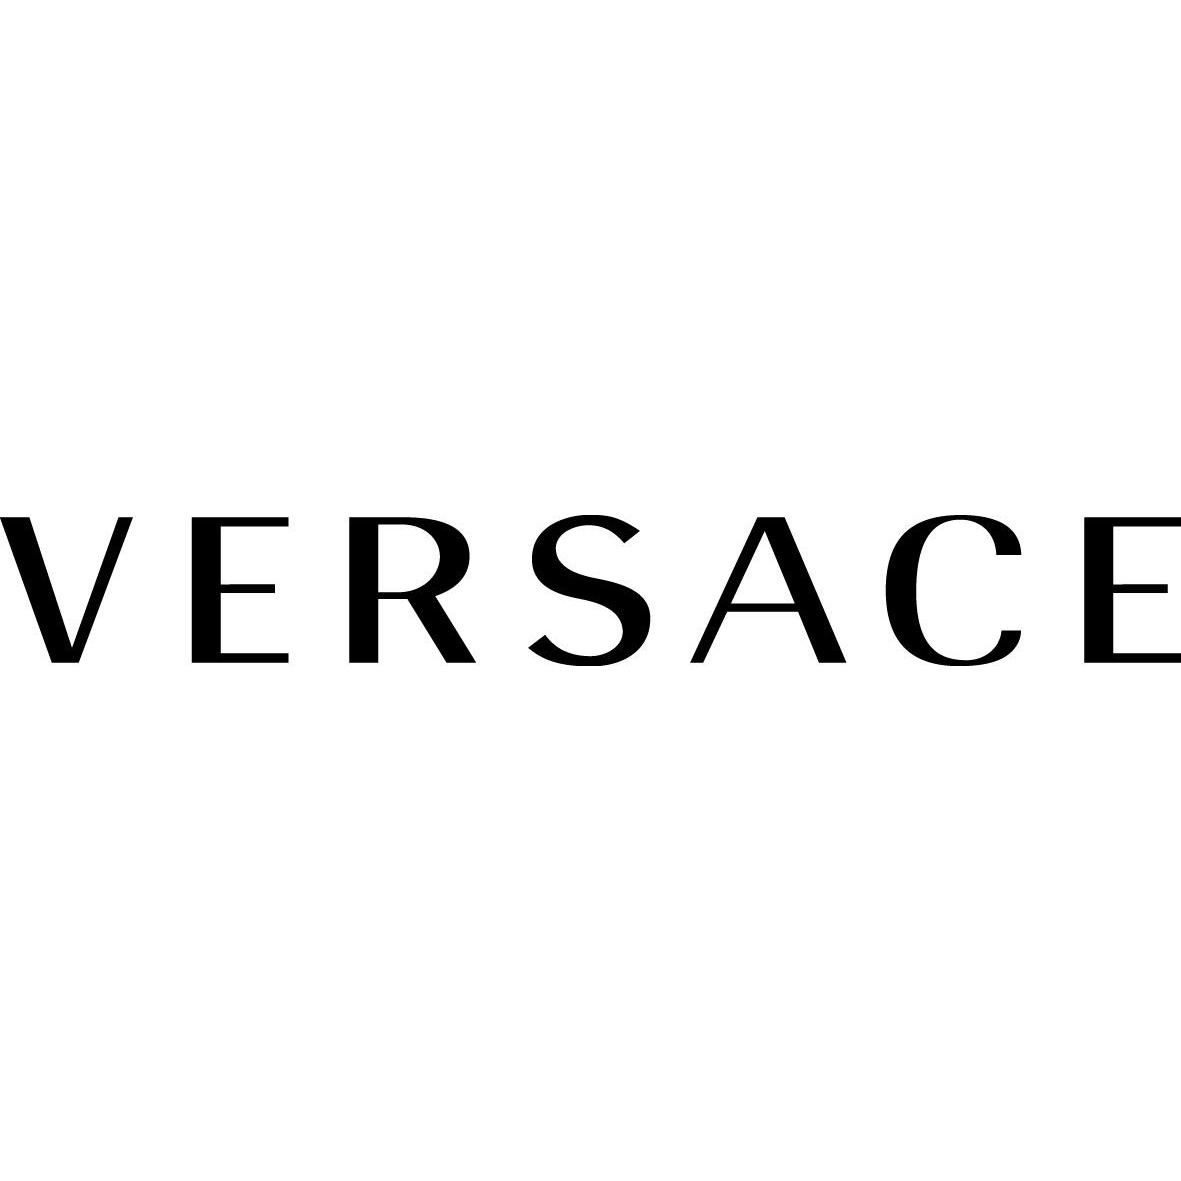 VERSACE - Clothing Manufacturers & Wholesalers